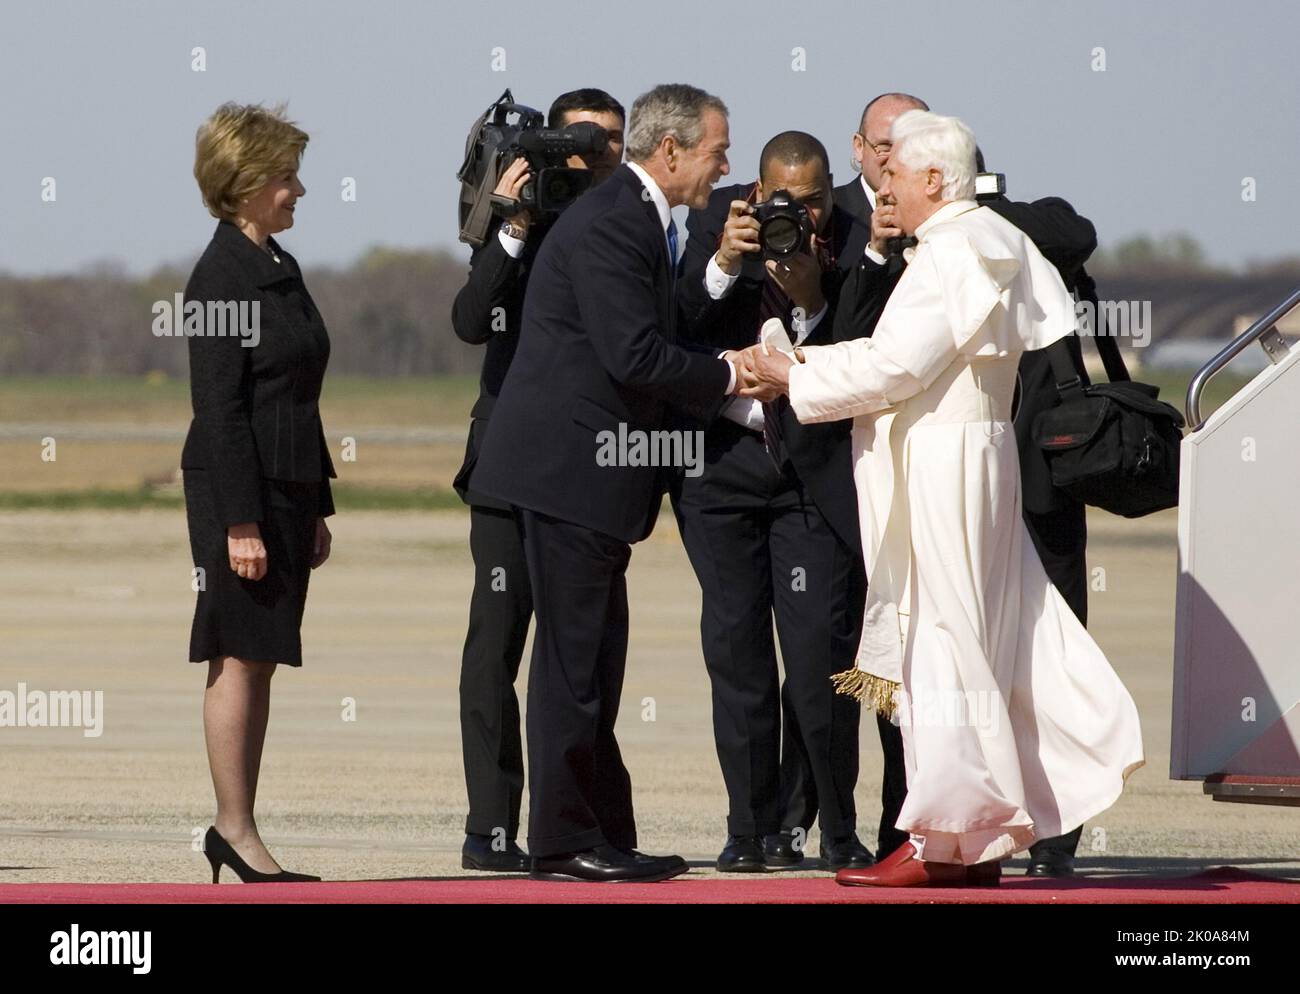 President George W. Bush and Laura Bush greet Pope Benedict XVI on his arrival at Andrews Air Force Base, Maryland, 2008 Stock Photo